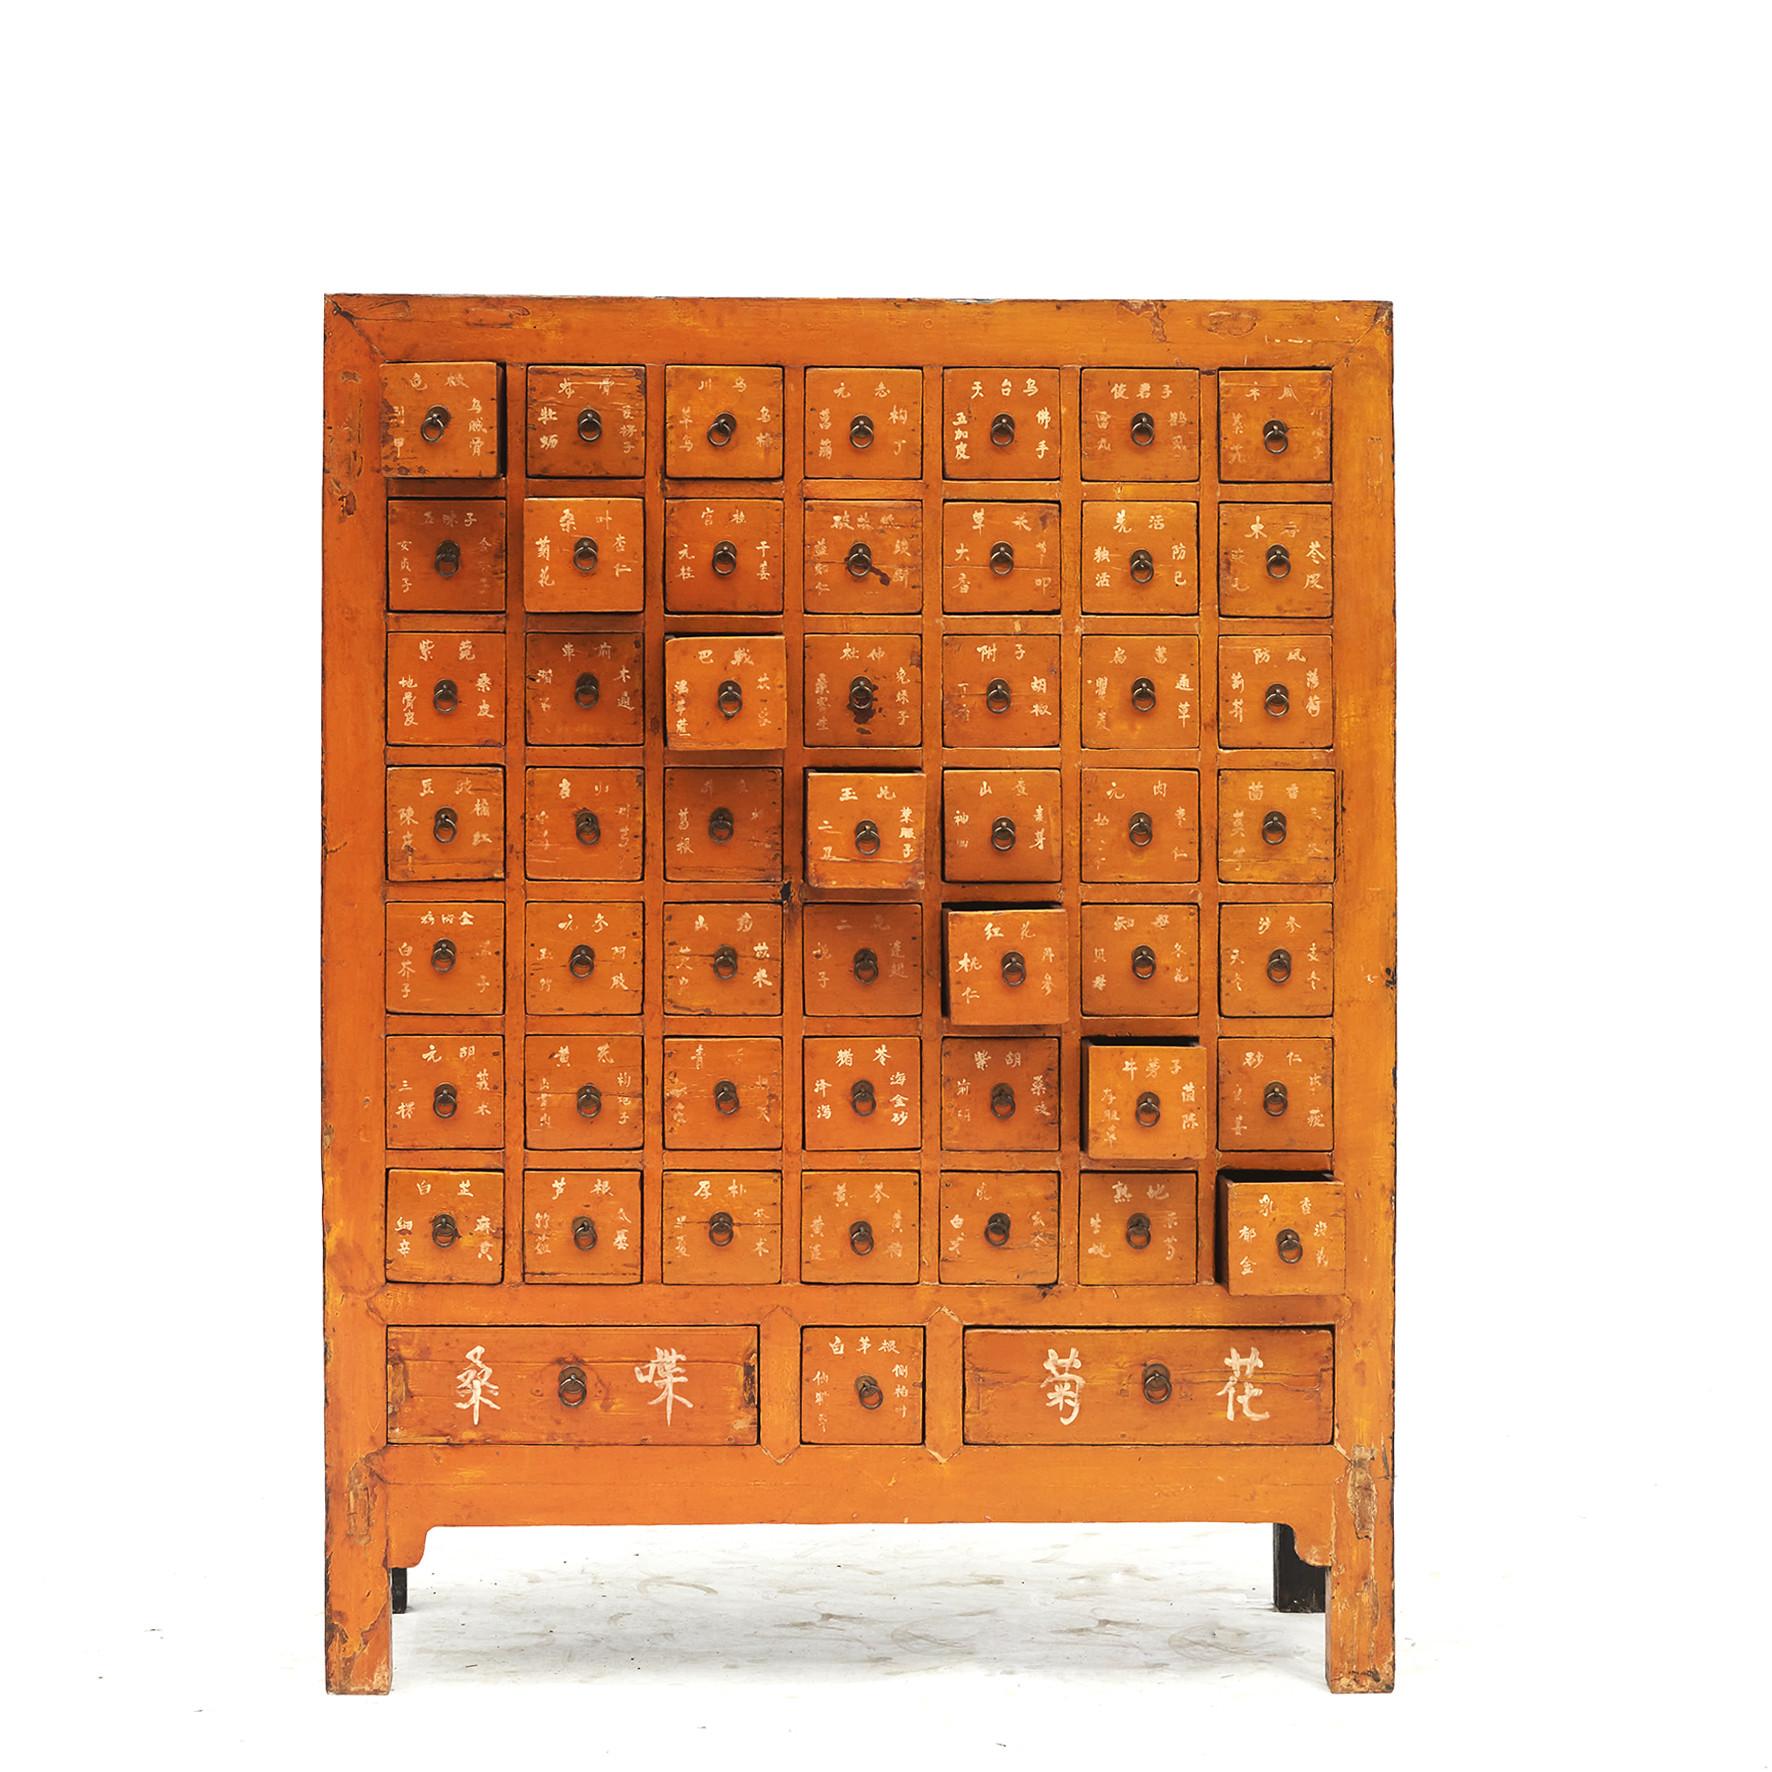 Chinese apothecary / pharmacy medicine chest with 52 drawers.
Drawers with descriptions of the different medicinal herbs.
China, mid-19th century.

Previously in China, the doctor and pharmacist were the same person and the medicine chest was